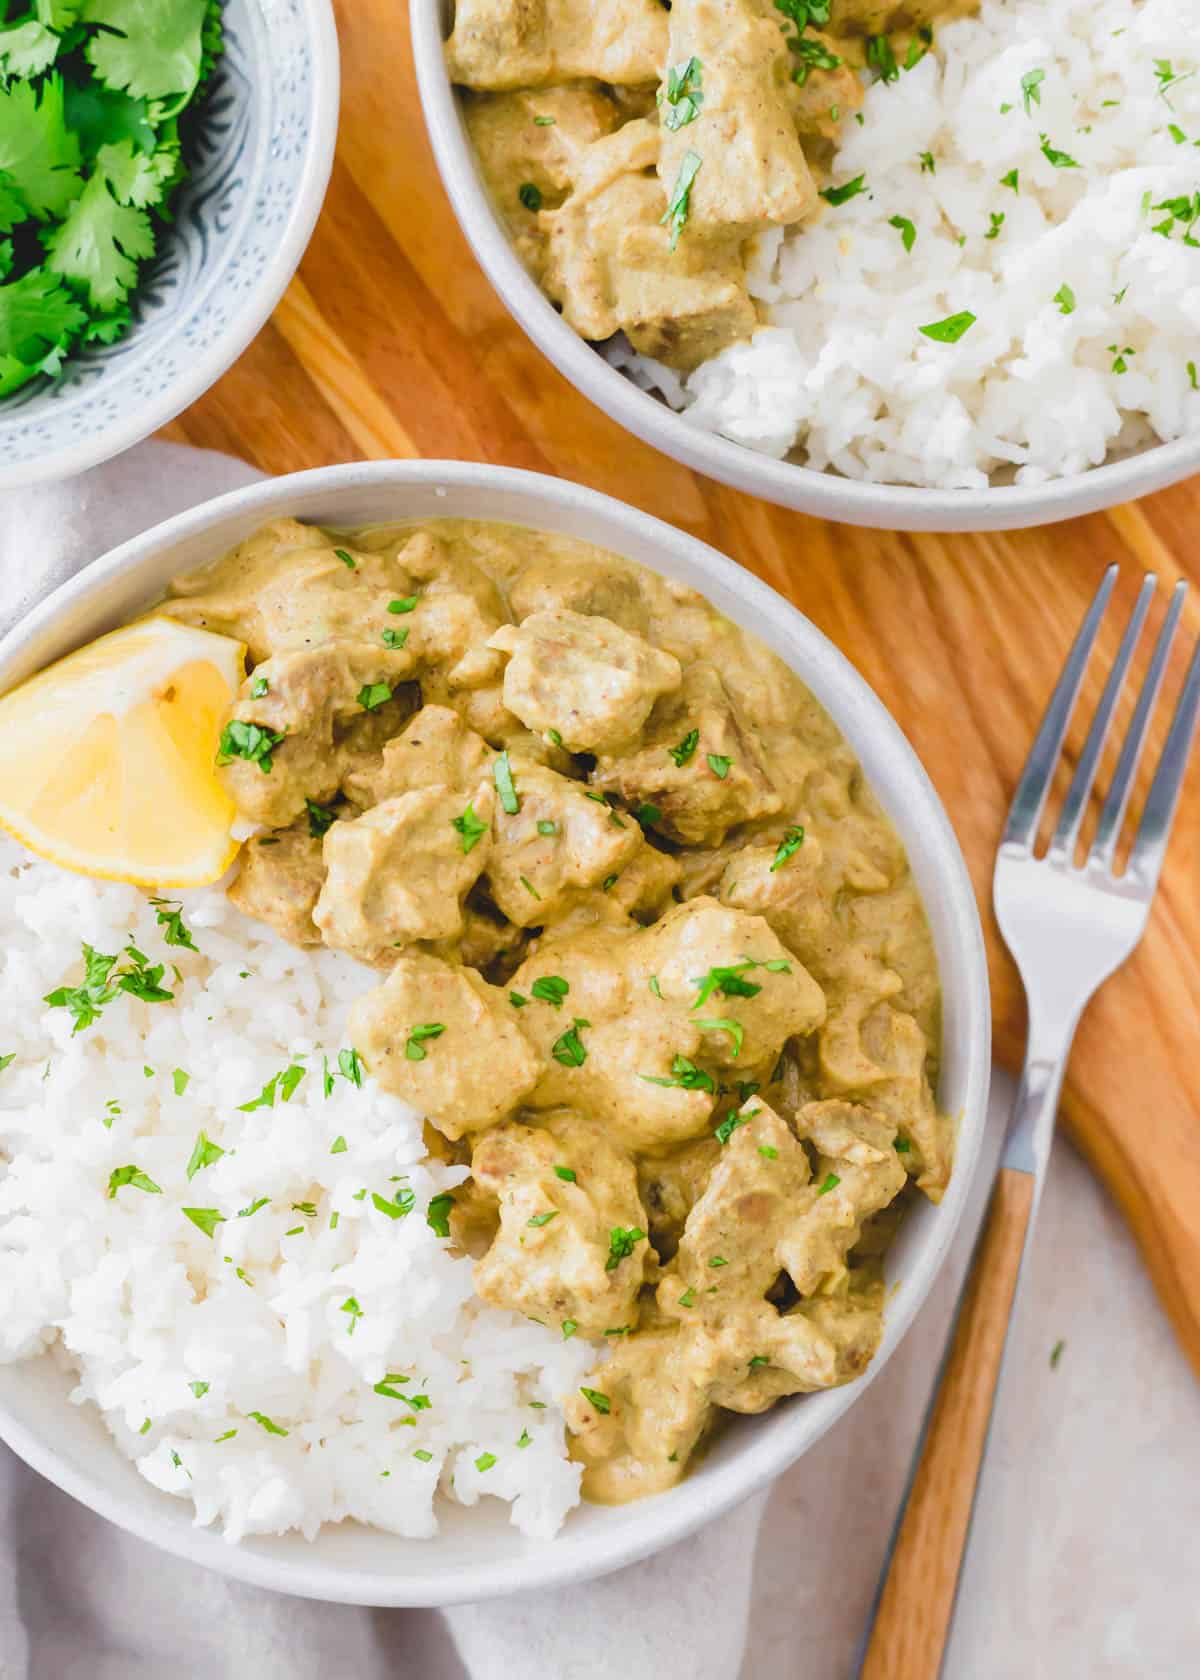 Lamb korma recipe served with white rice in a bowl.